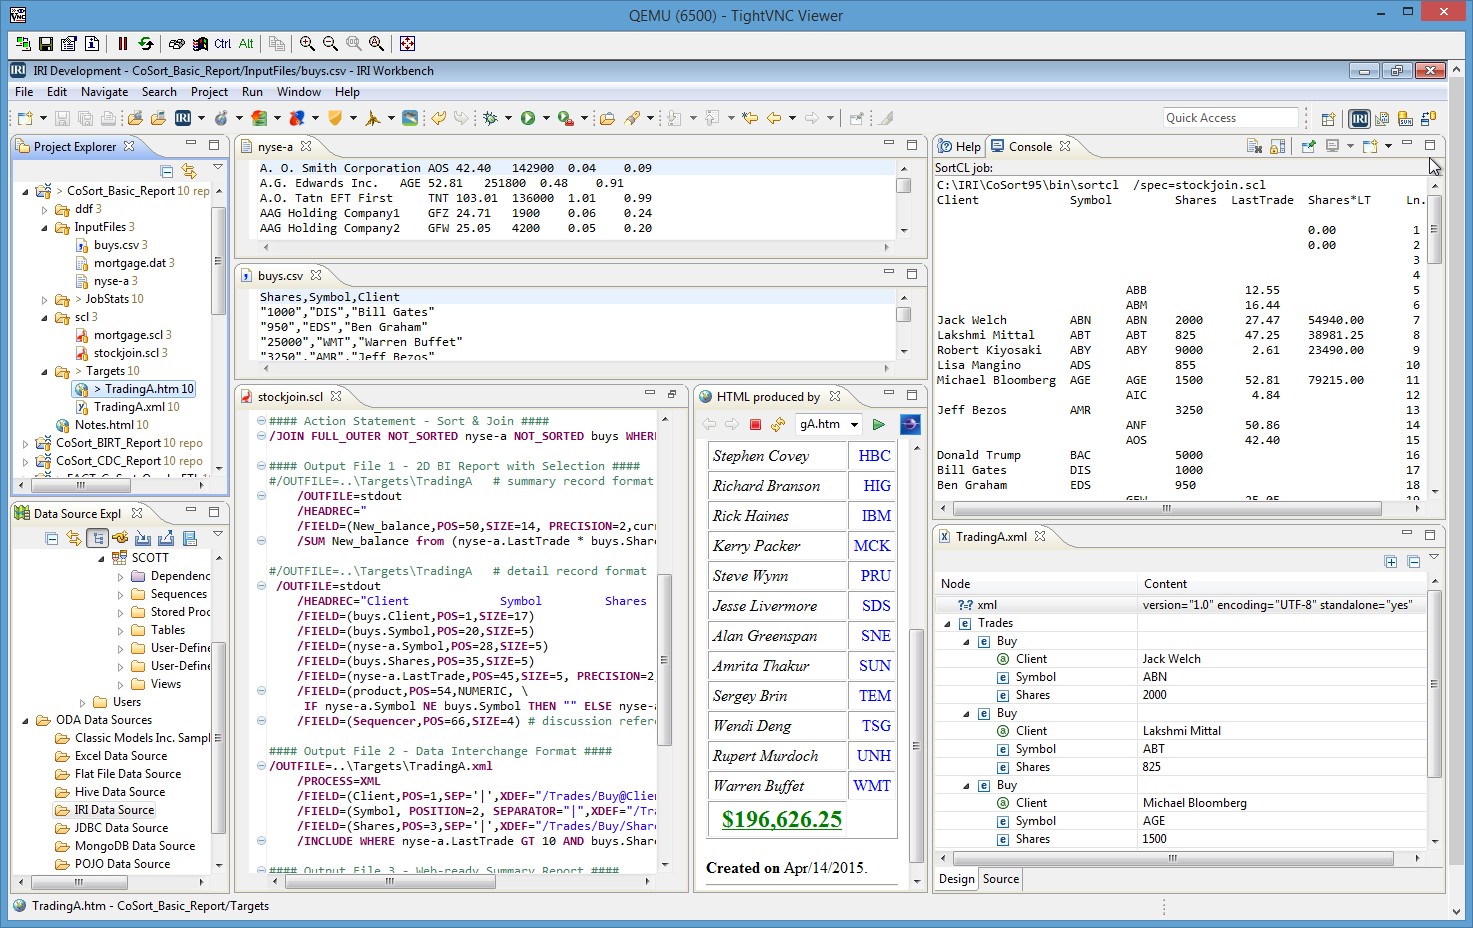 A view of the Embedded BI GUI